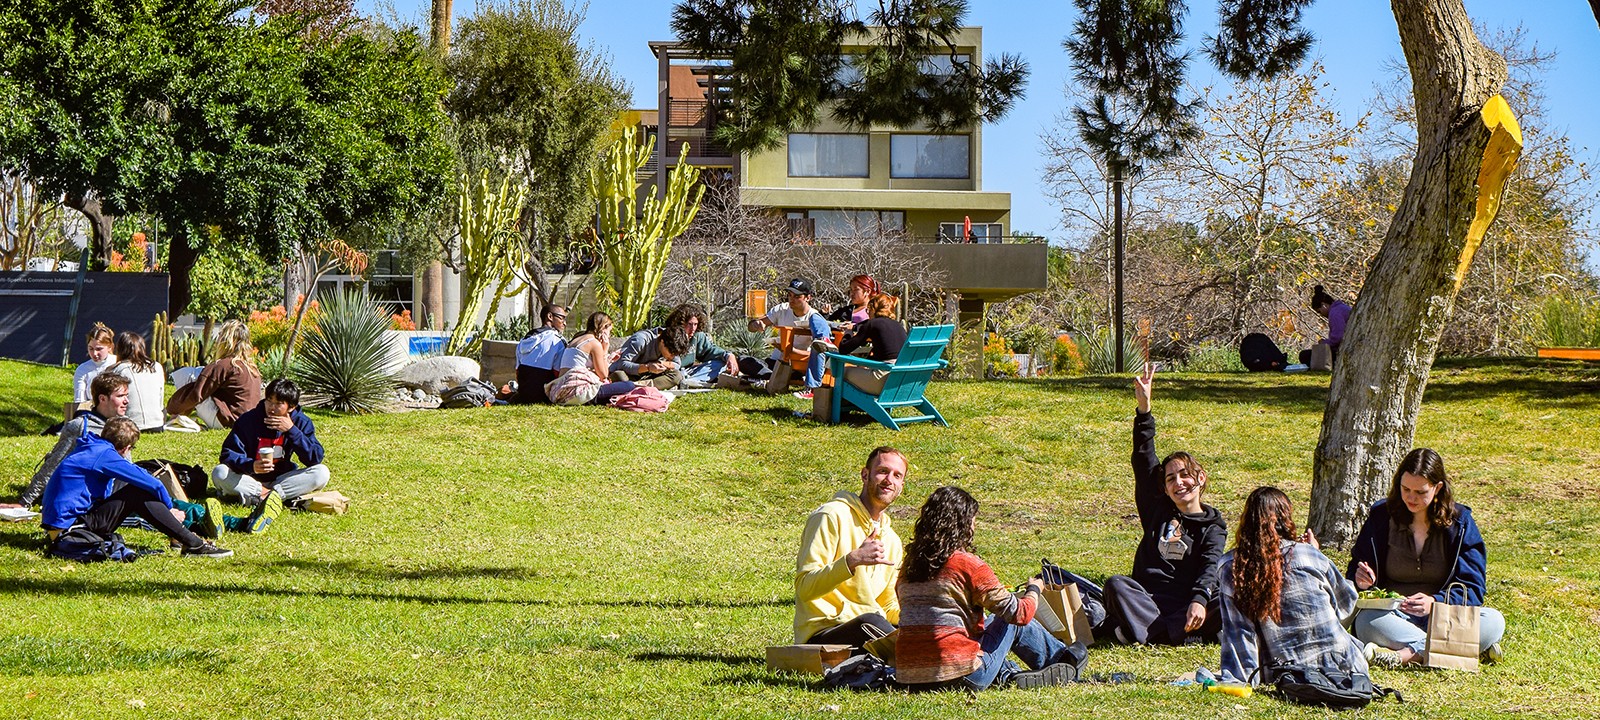 Pitzer College Calendar 2022 Pitzer College - A Member Of The Claremont Colleges